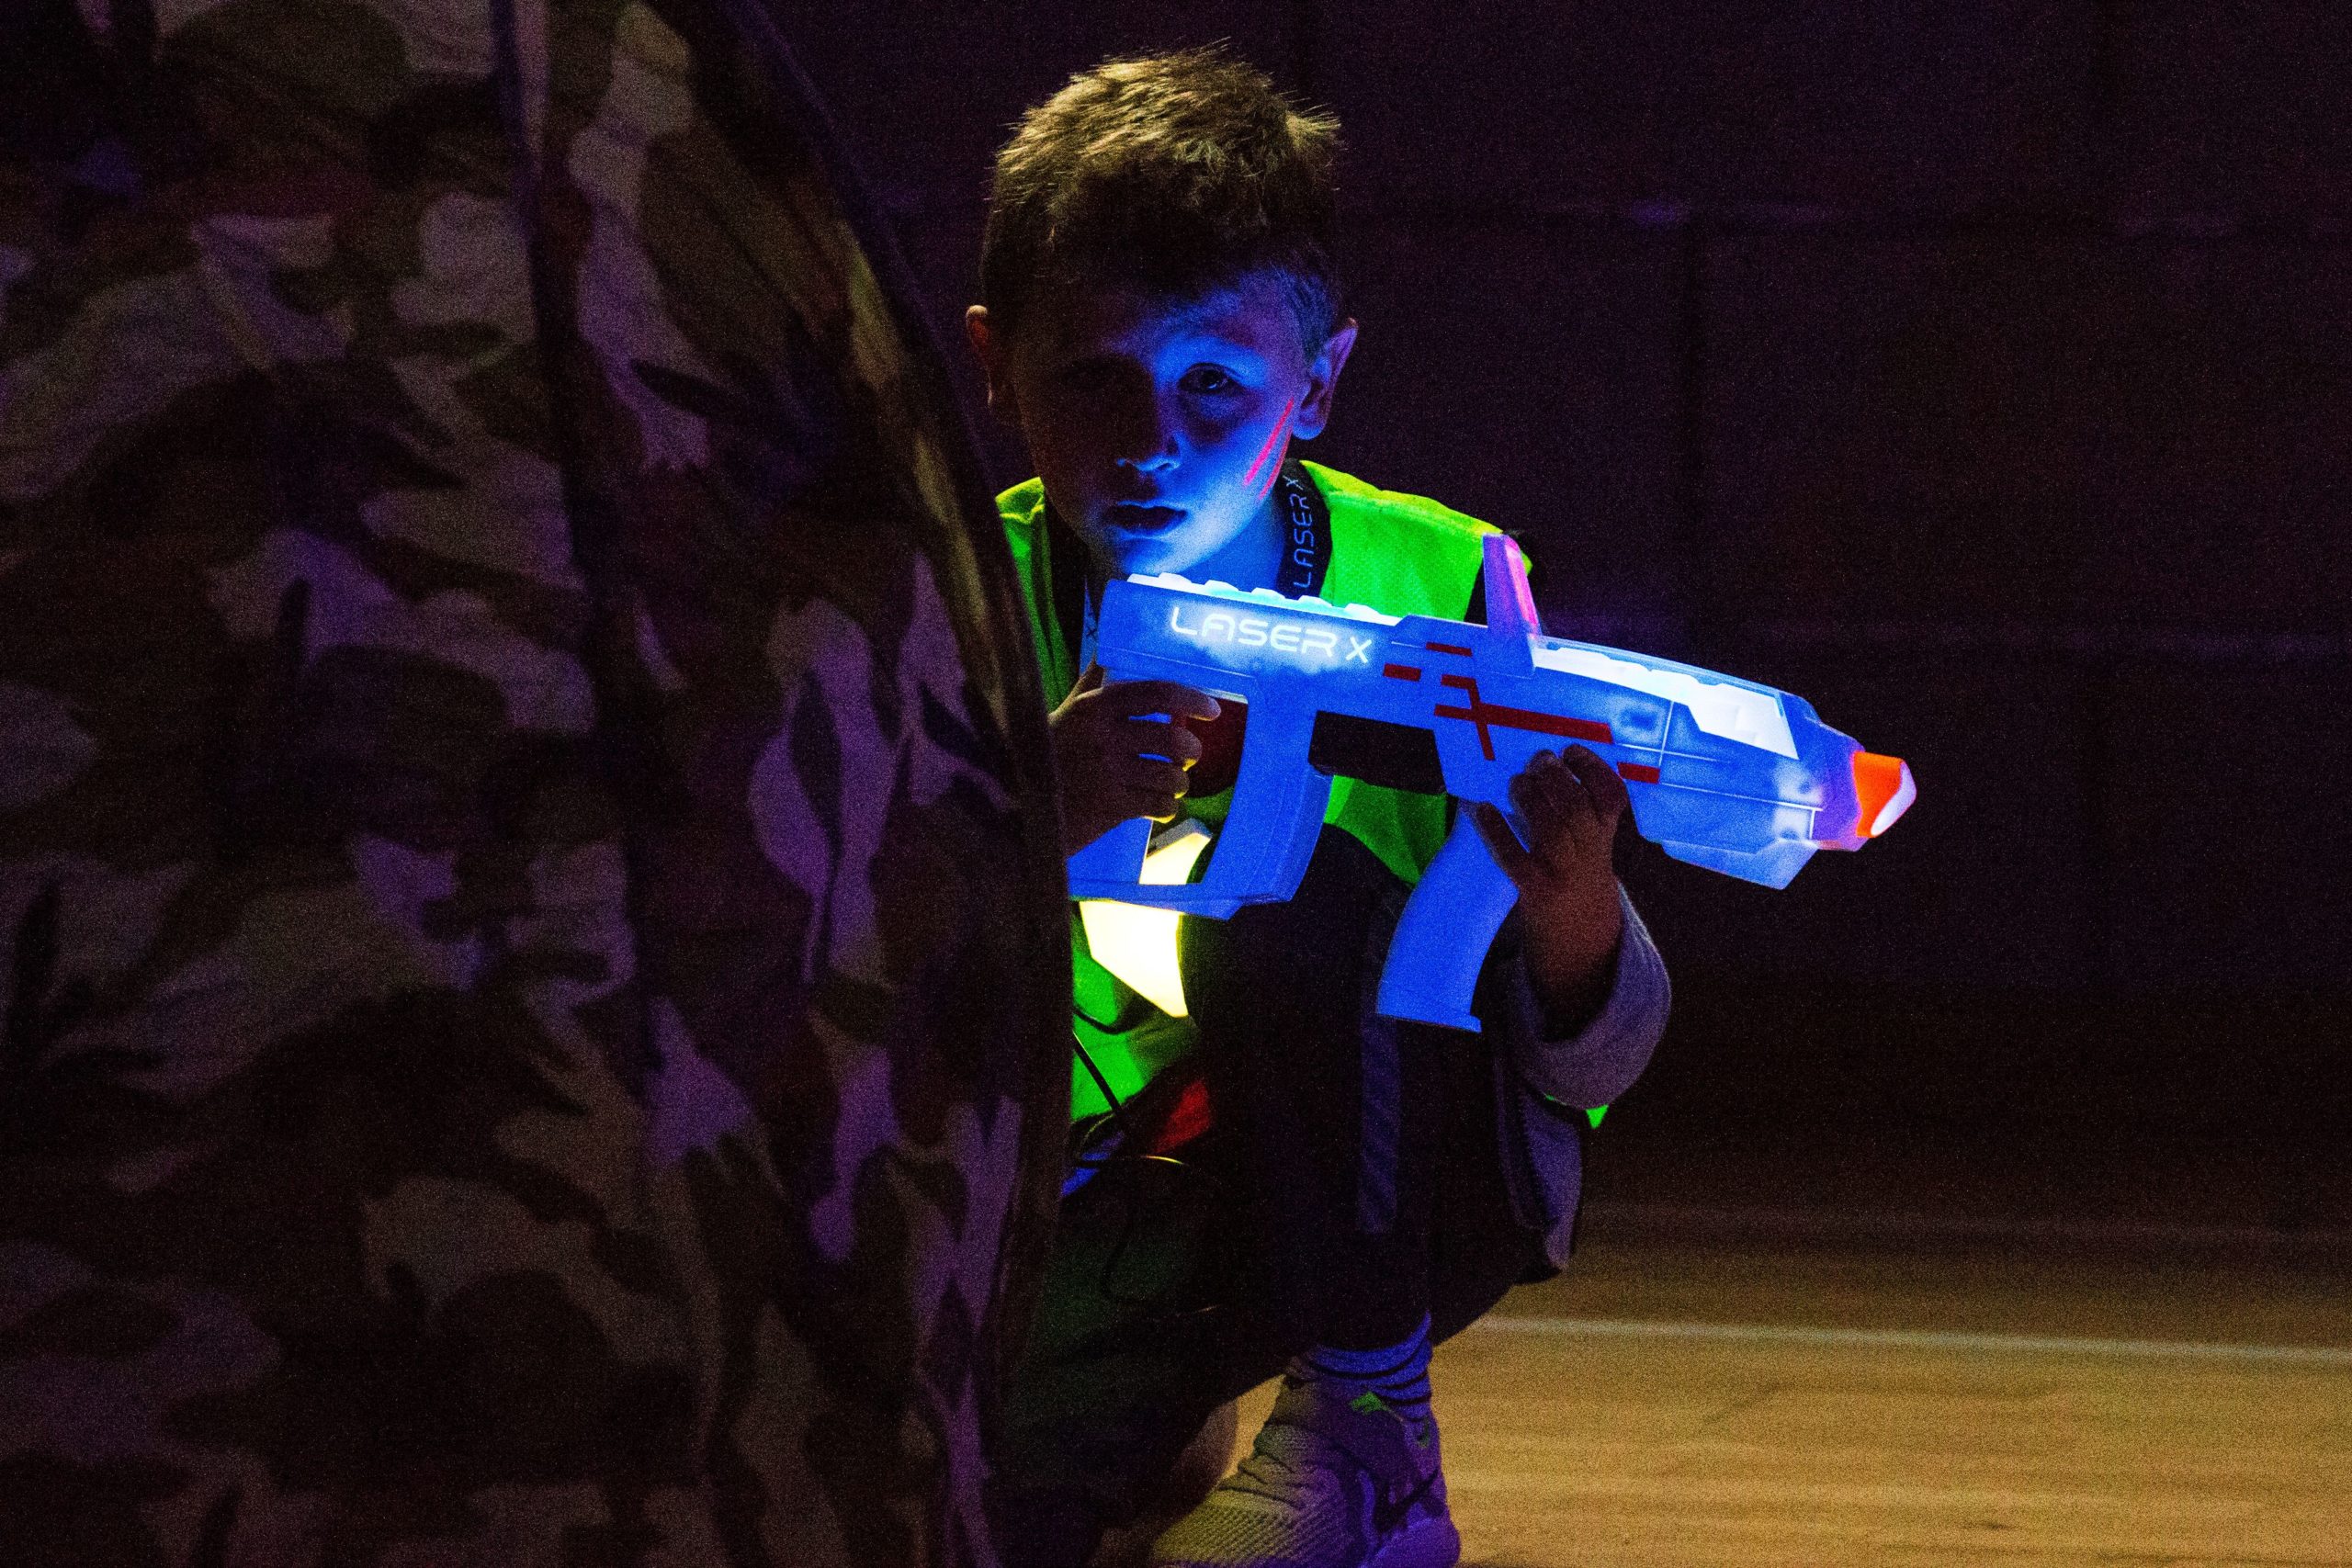 Laser Tag Party at Tolworth Leisure Centre